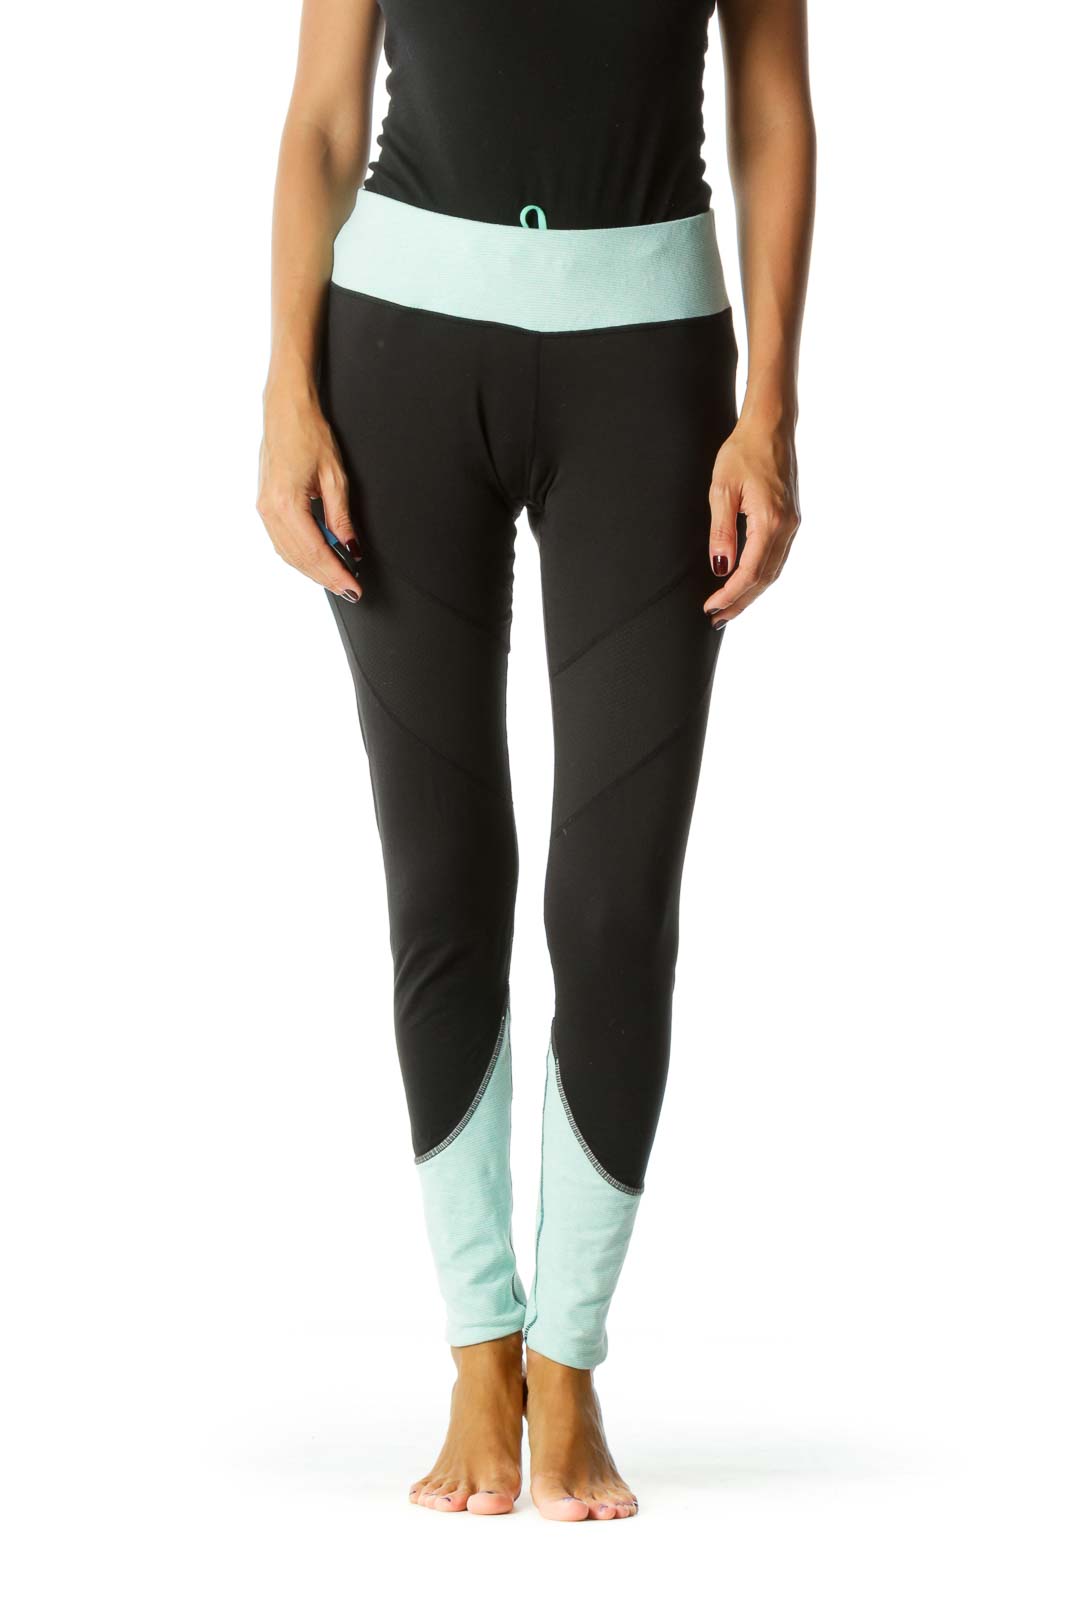 Black and Teal Color Blocked Leggings Front